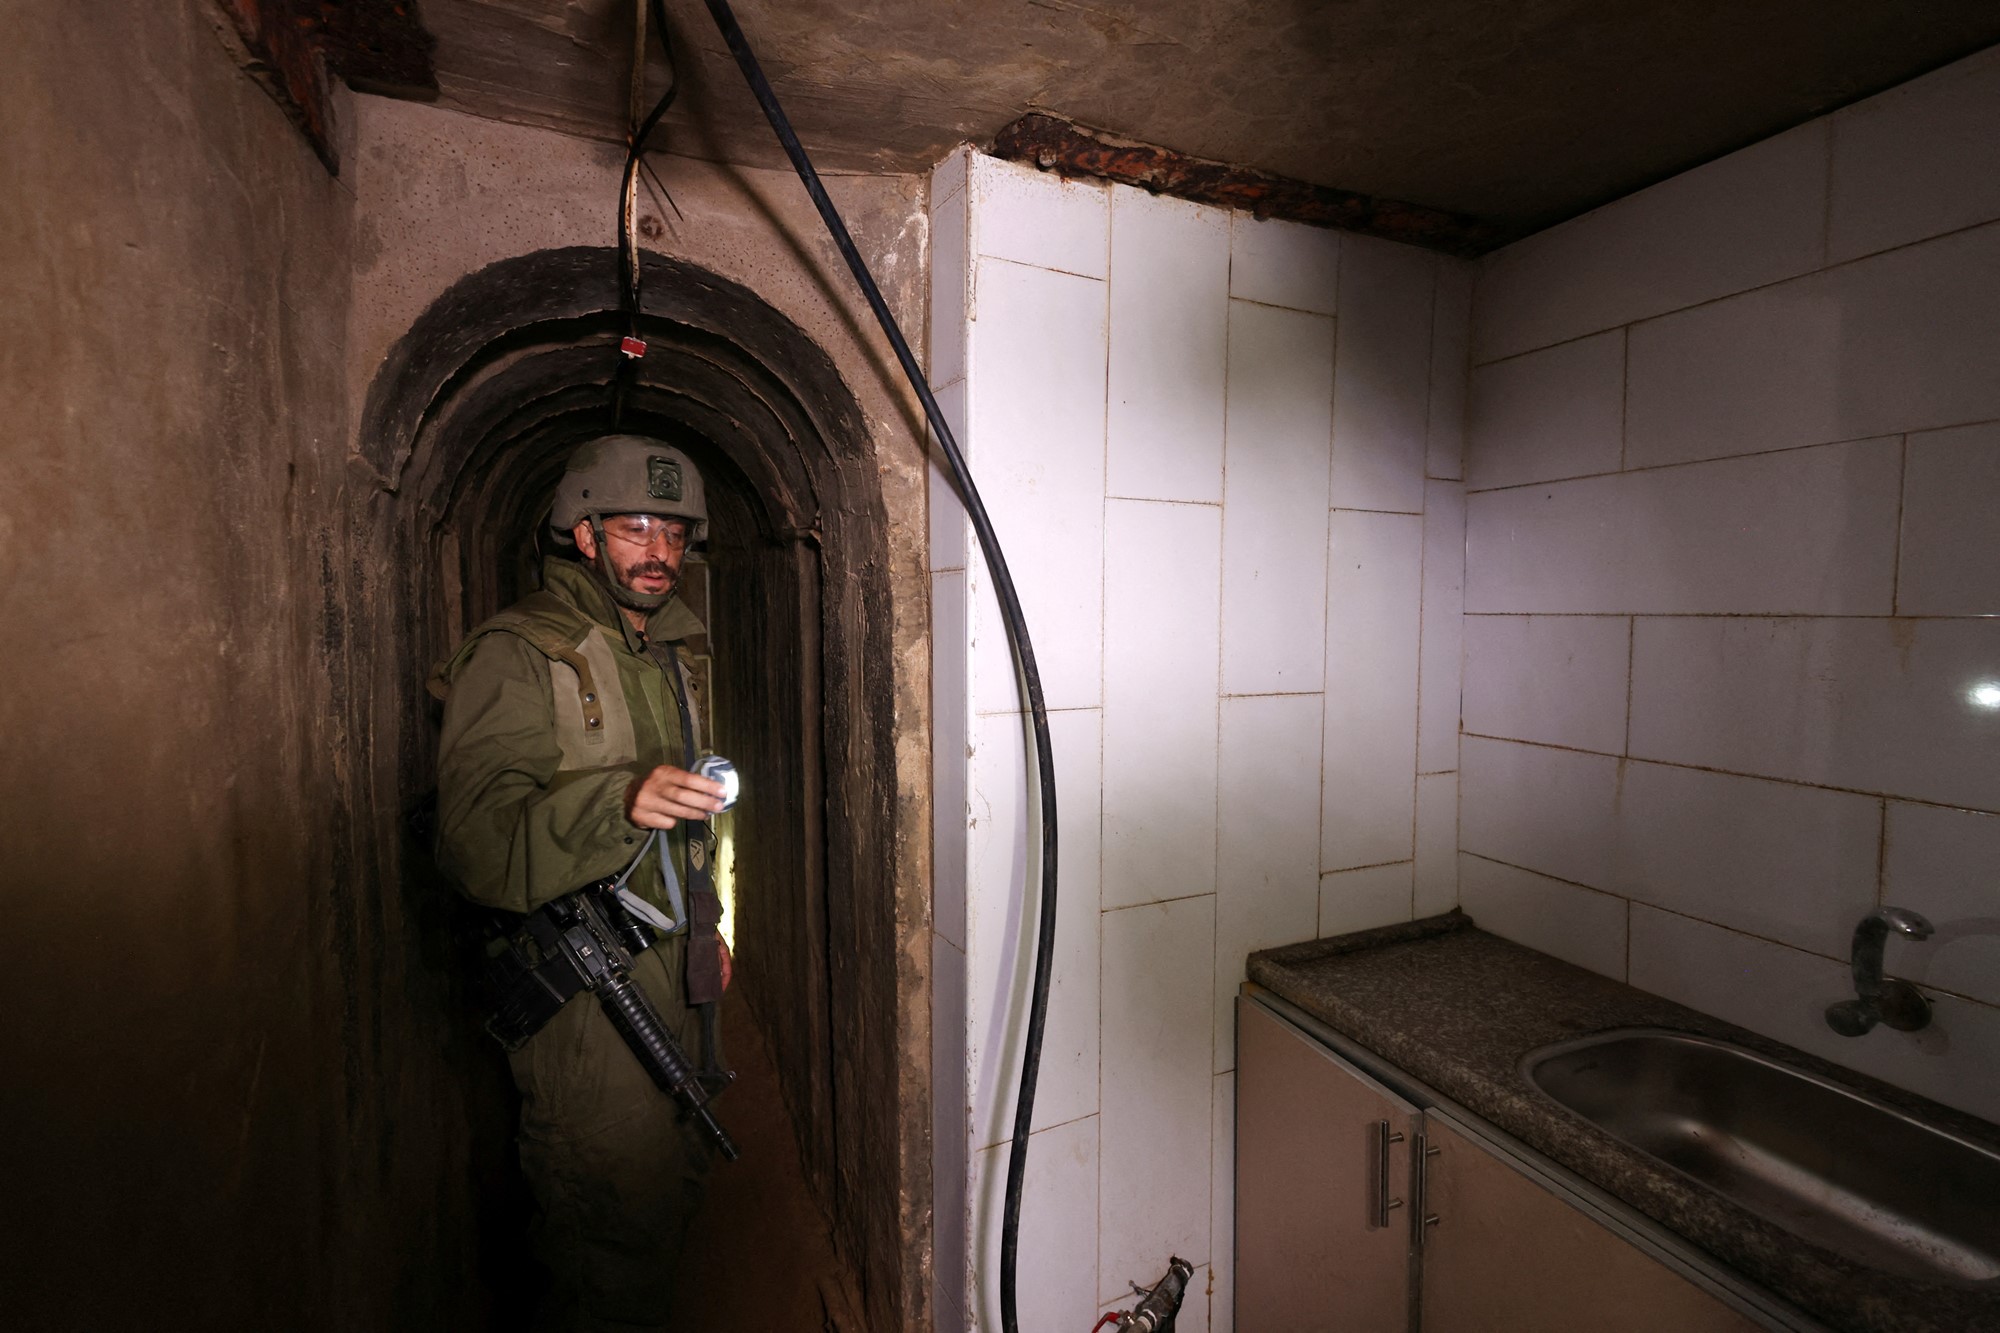 A soldier is pictured in a dark space with a kitchen sink on the right.